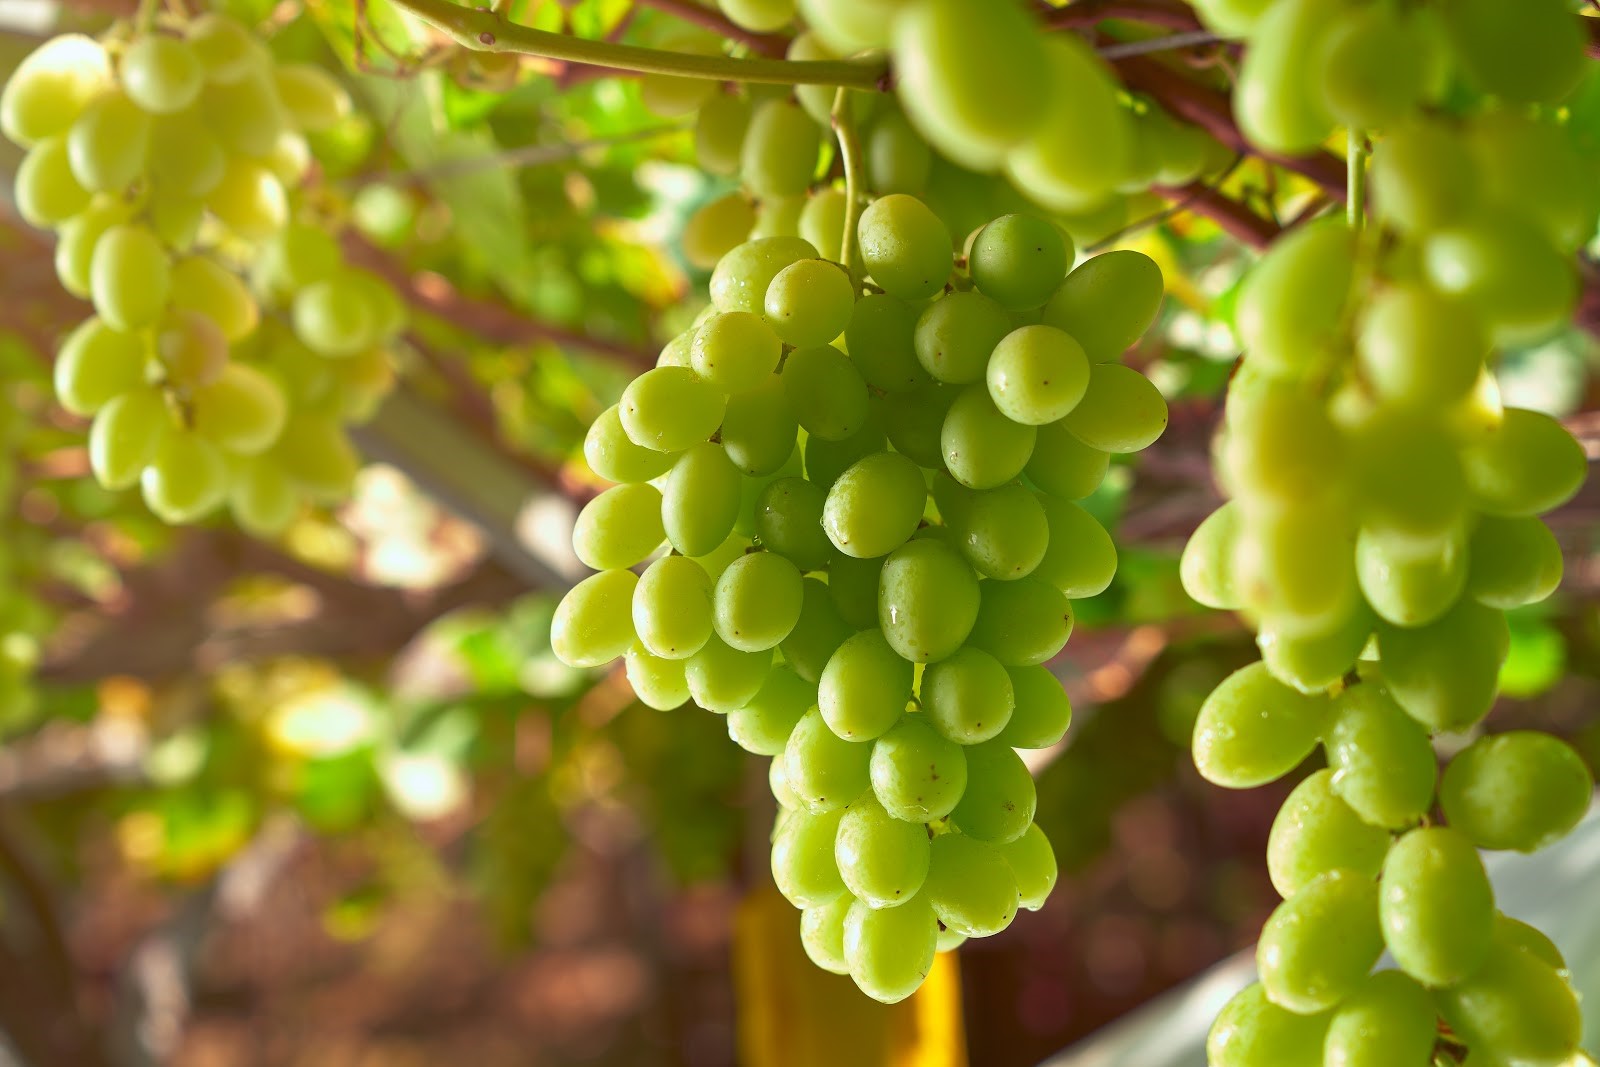 The Peruvian grape season begins with prospects for growth in exports of premium varieties